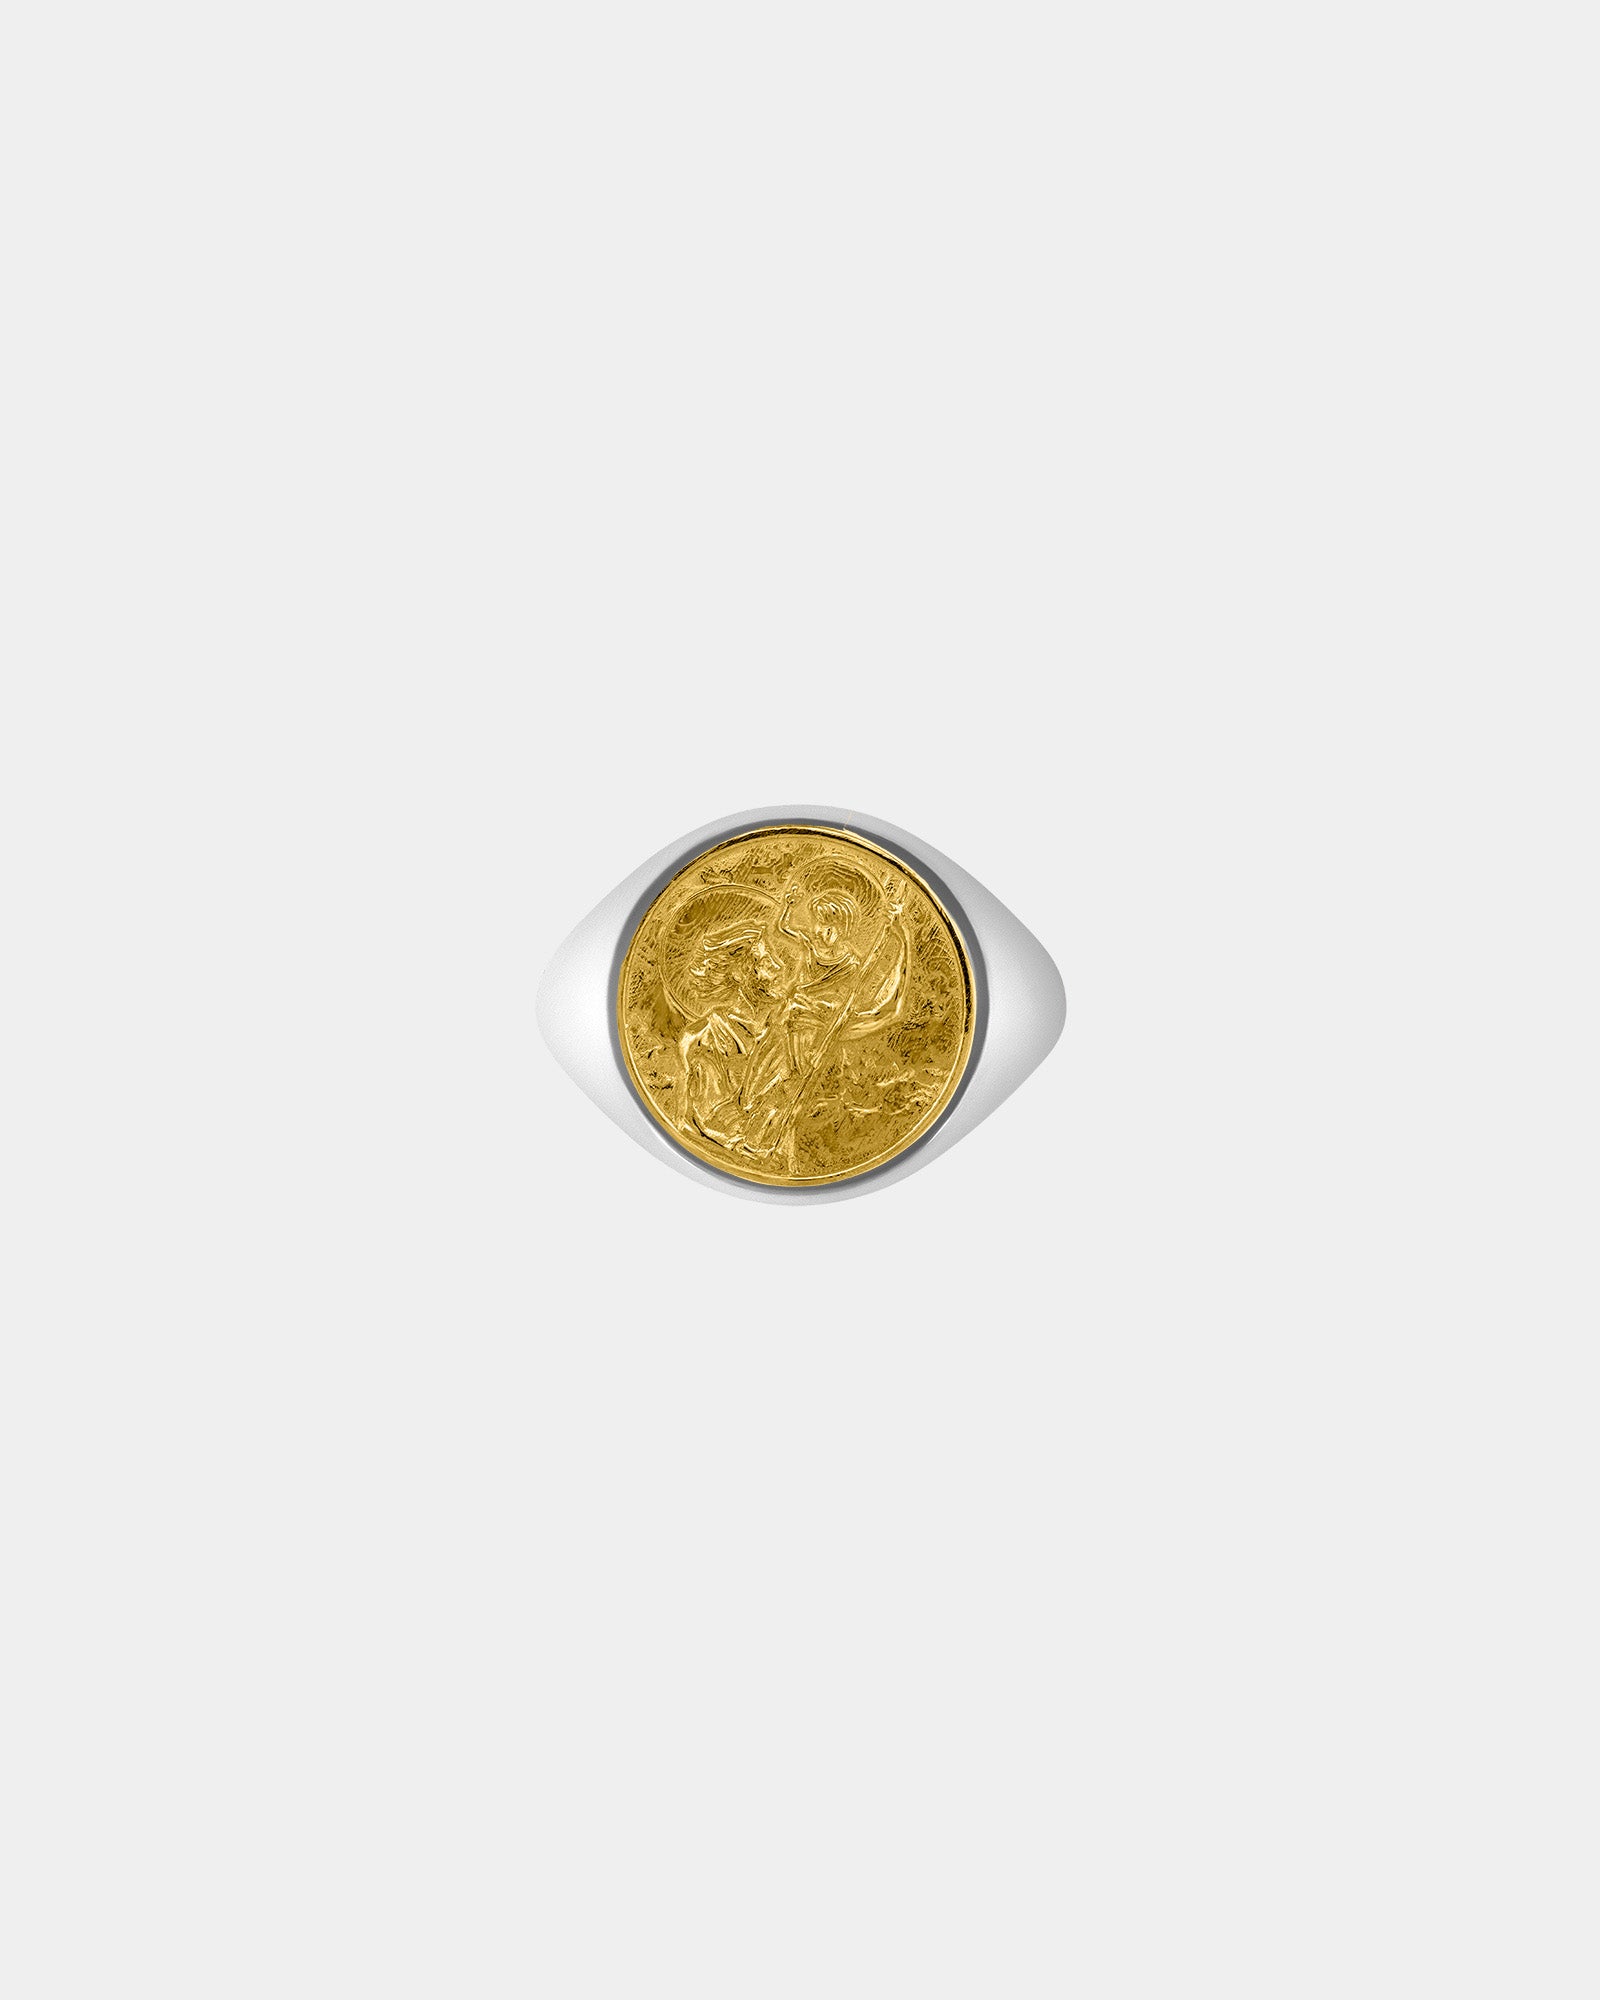 Saint Christopher Signet Ring | Silver/Yellow Gold - Wilson Grant